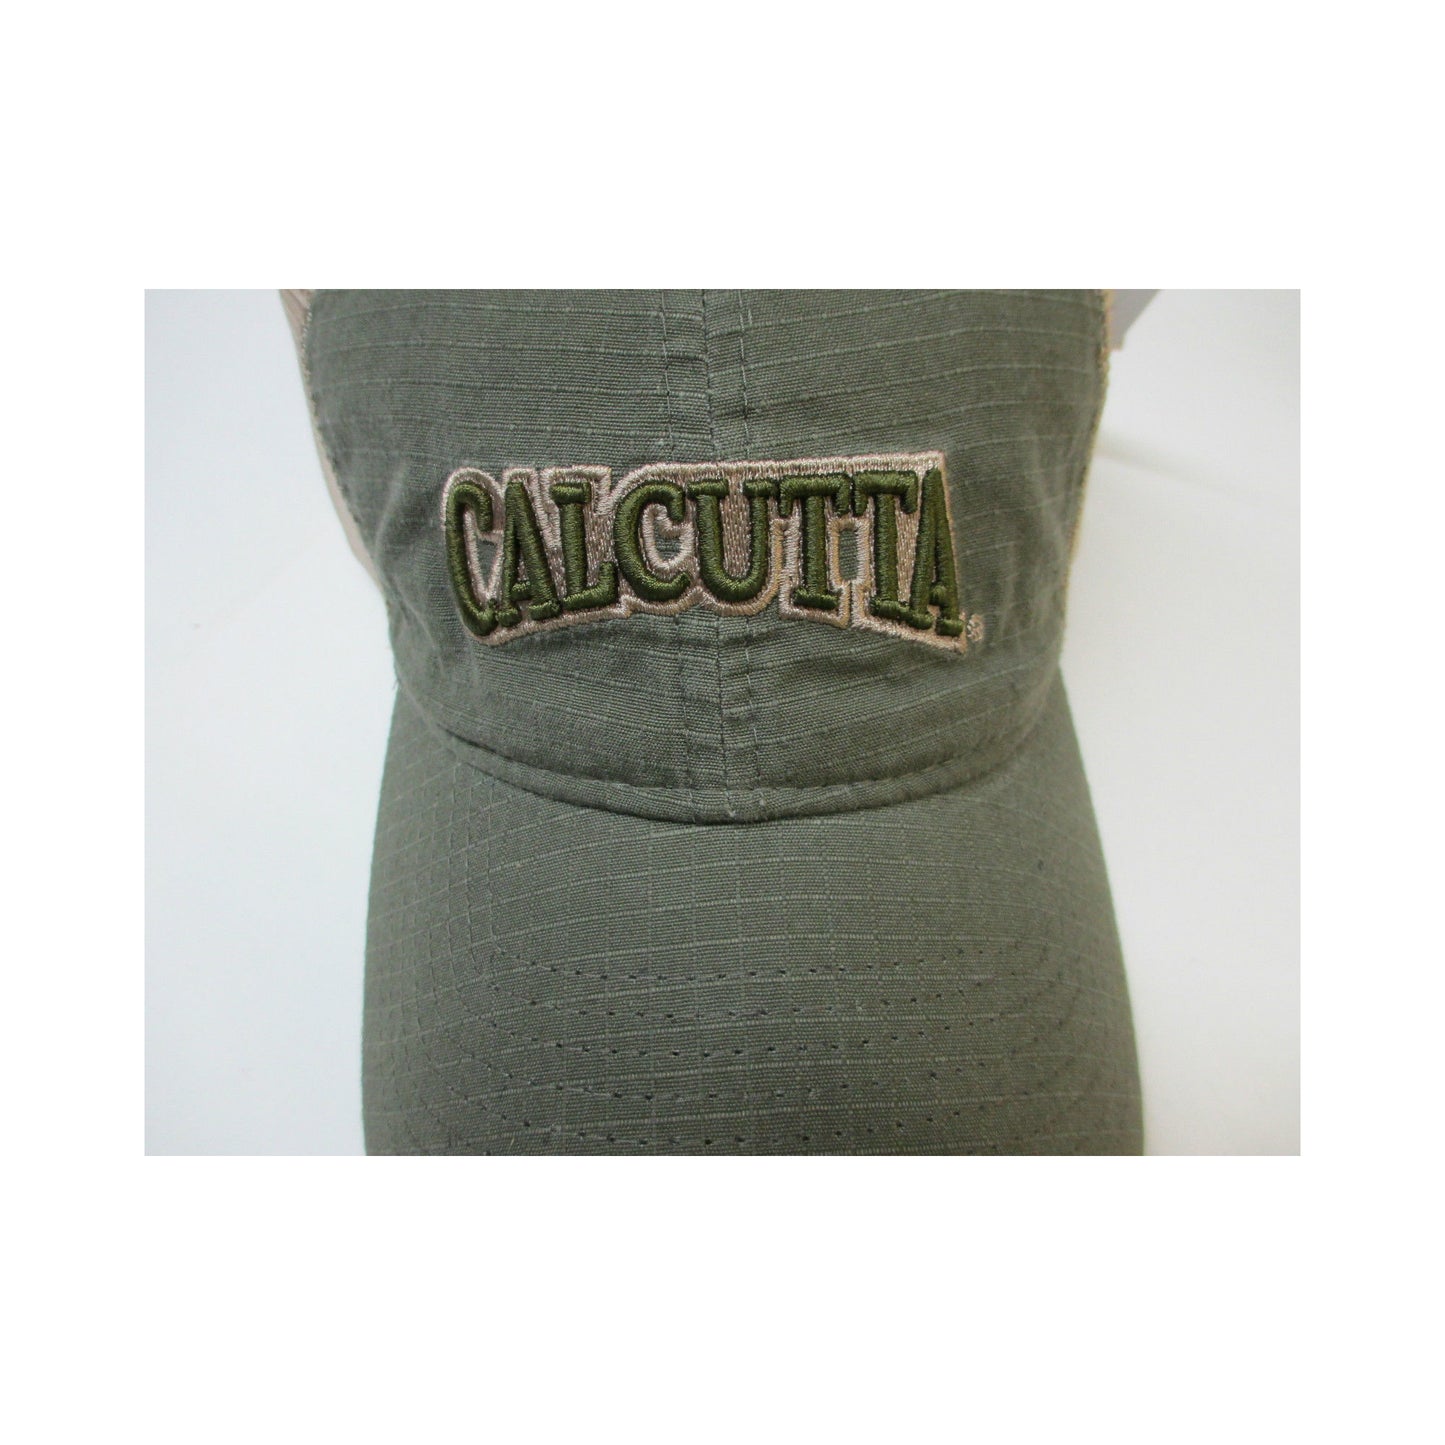 New Authentic Calcutta Hat Olive Green with Calcutta on Front Tan Mesh